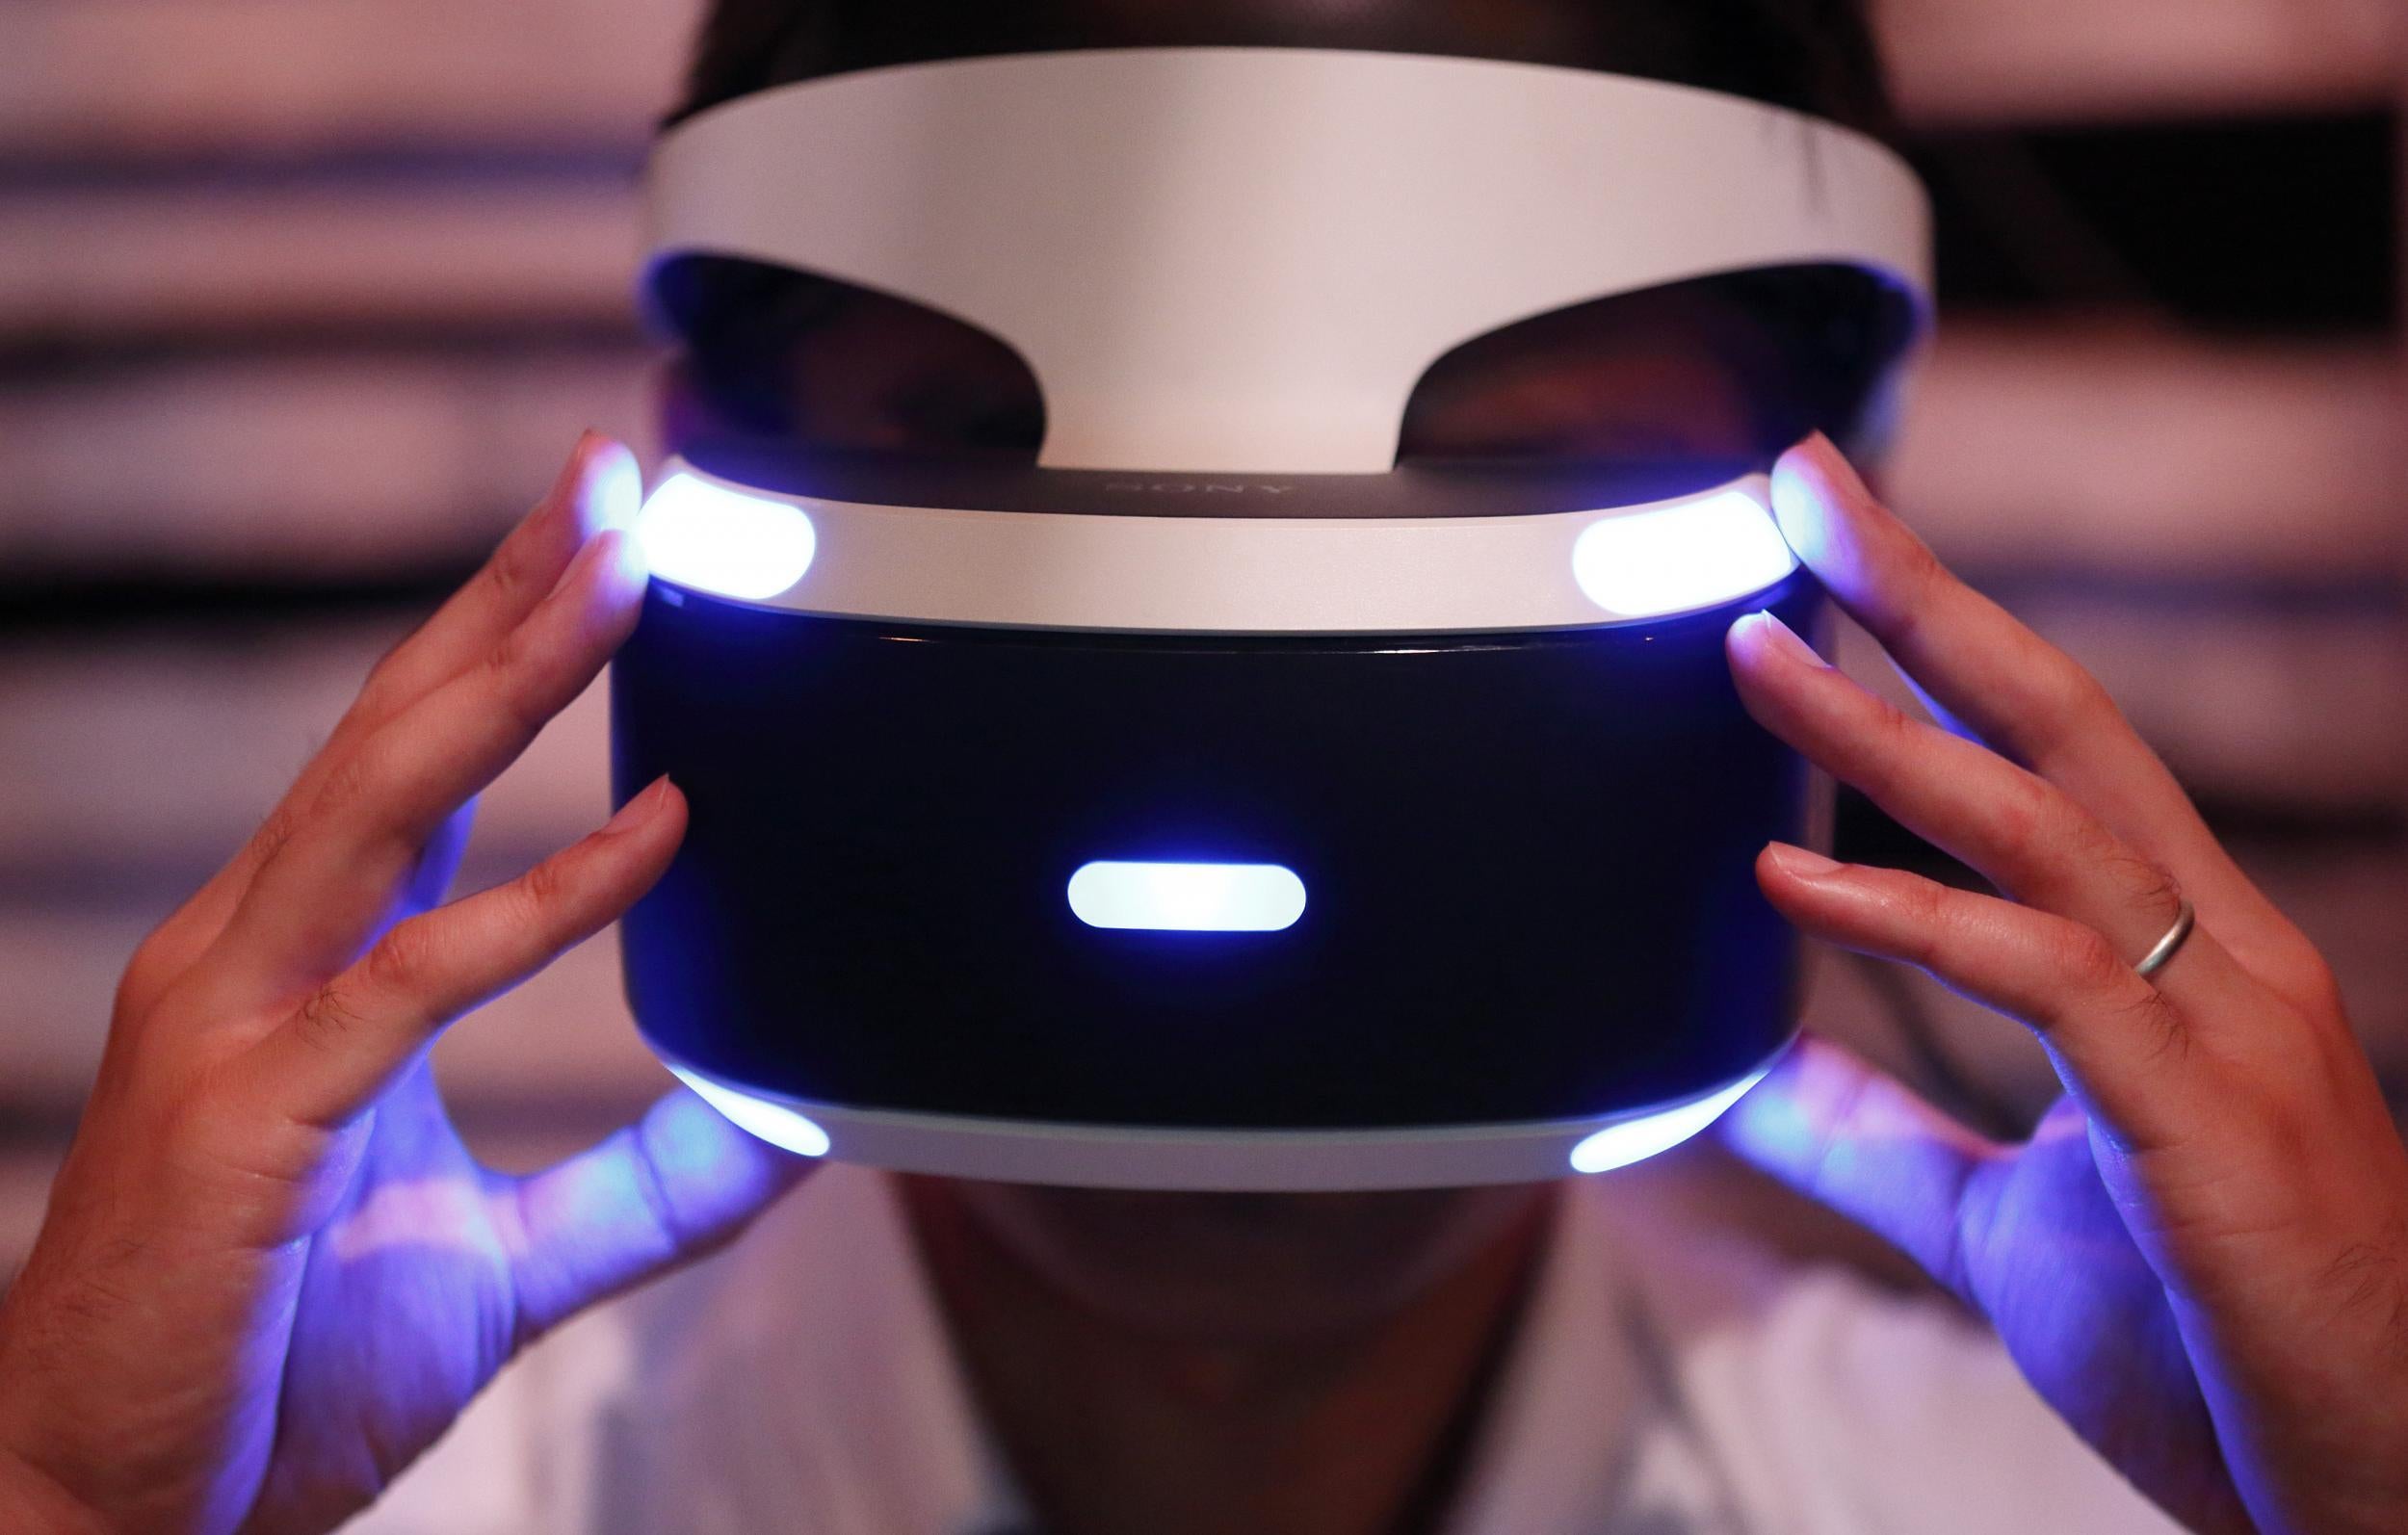 A PlayStation VR headset being used